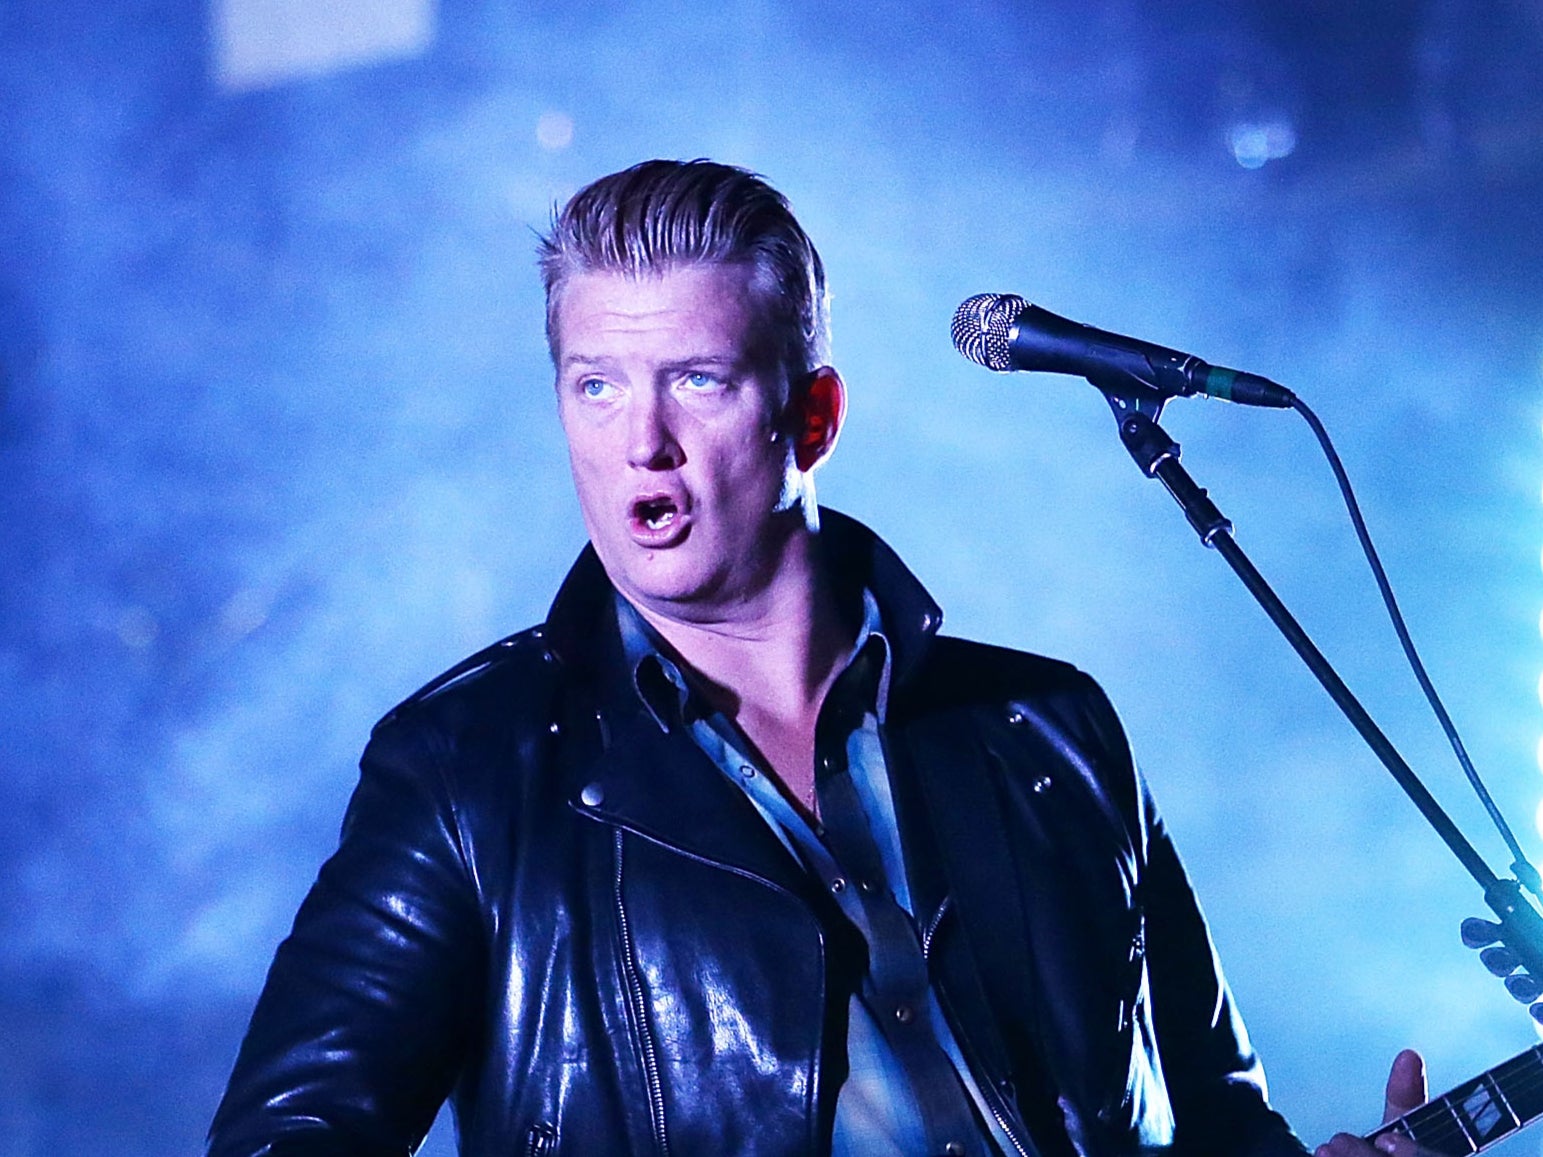 Josh Homme is locked in a bitter custody dispute with his ex-wife, Brody Dalle